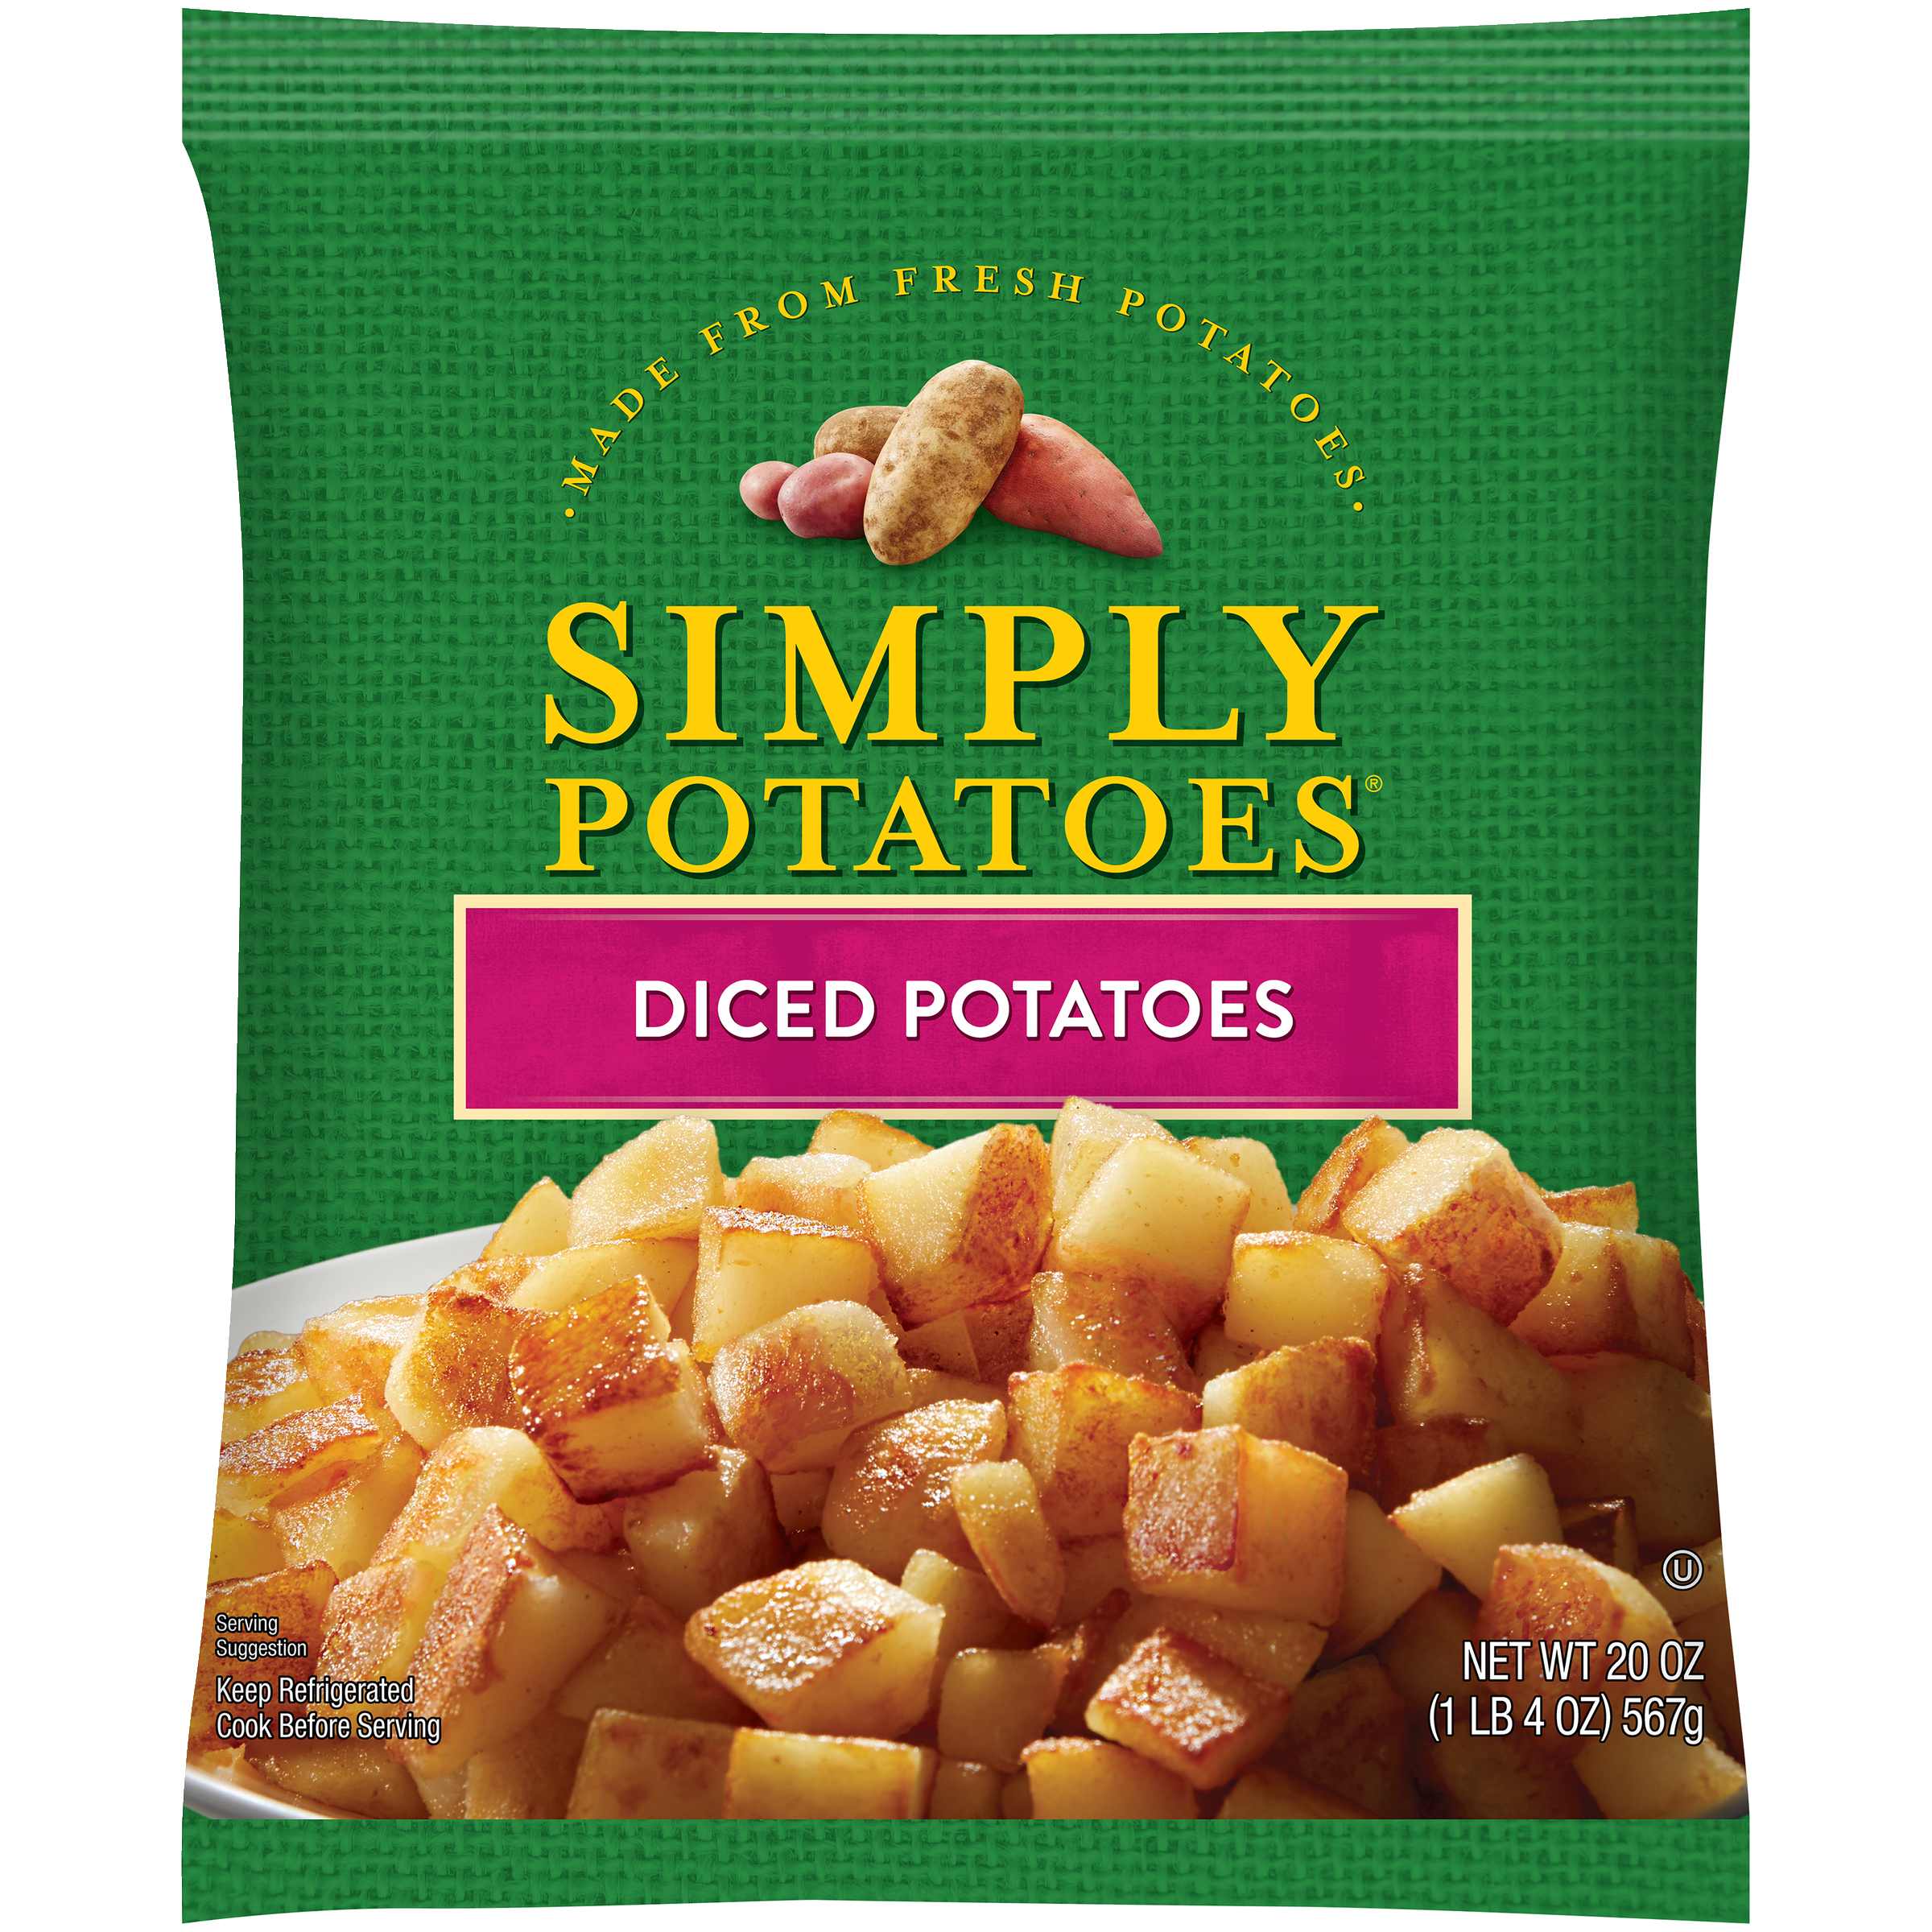 Simply Potatoes Diced Potatoes product image